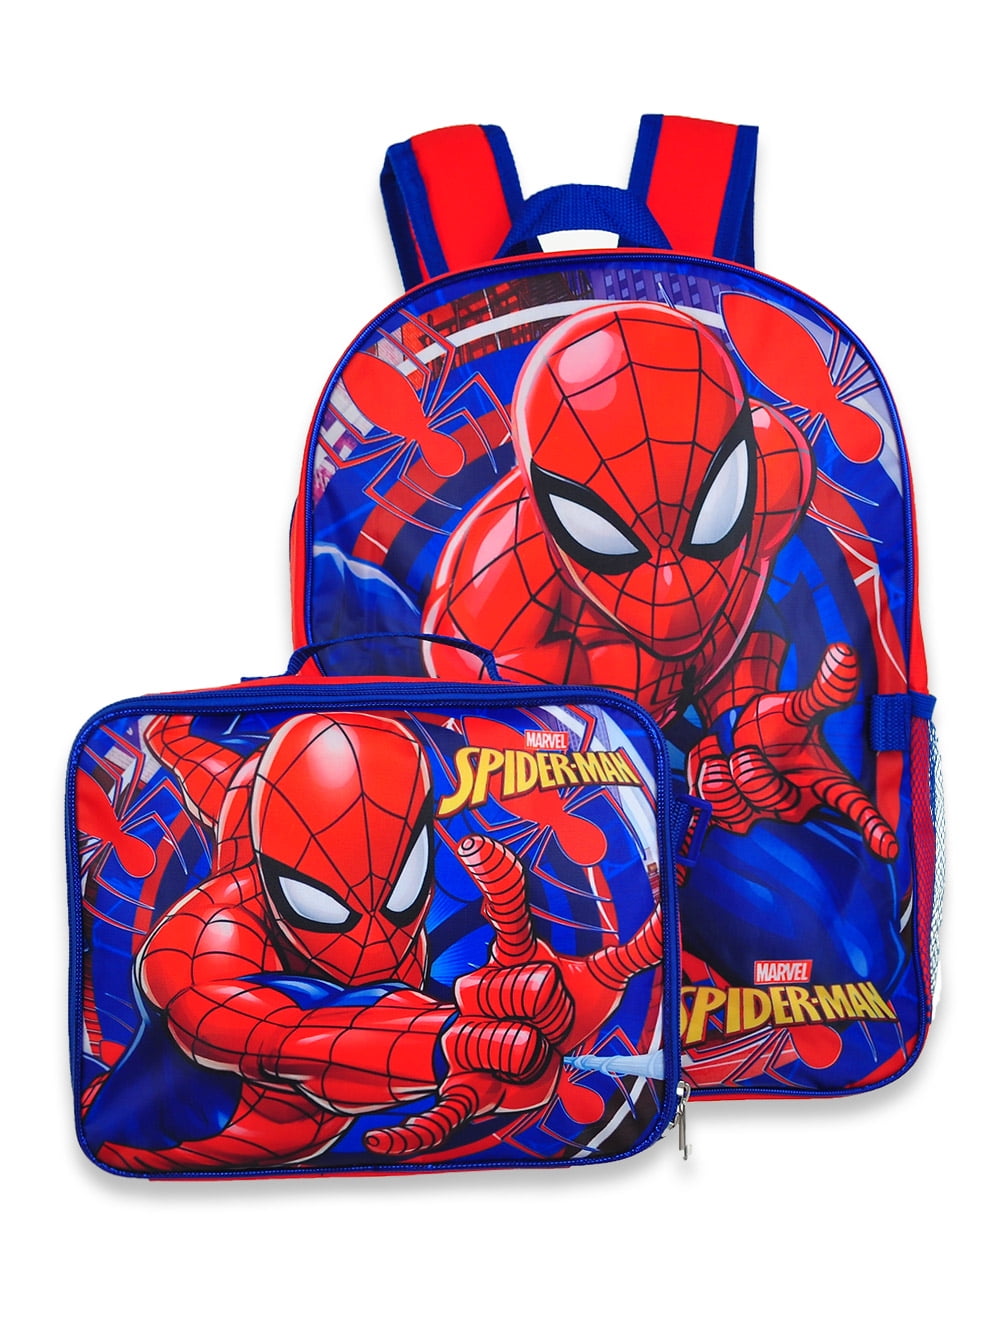 Marvel Spider-Man Boys' 2-Piece Backpack Lunchbox Set - red/multi, one ...